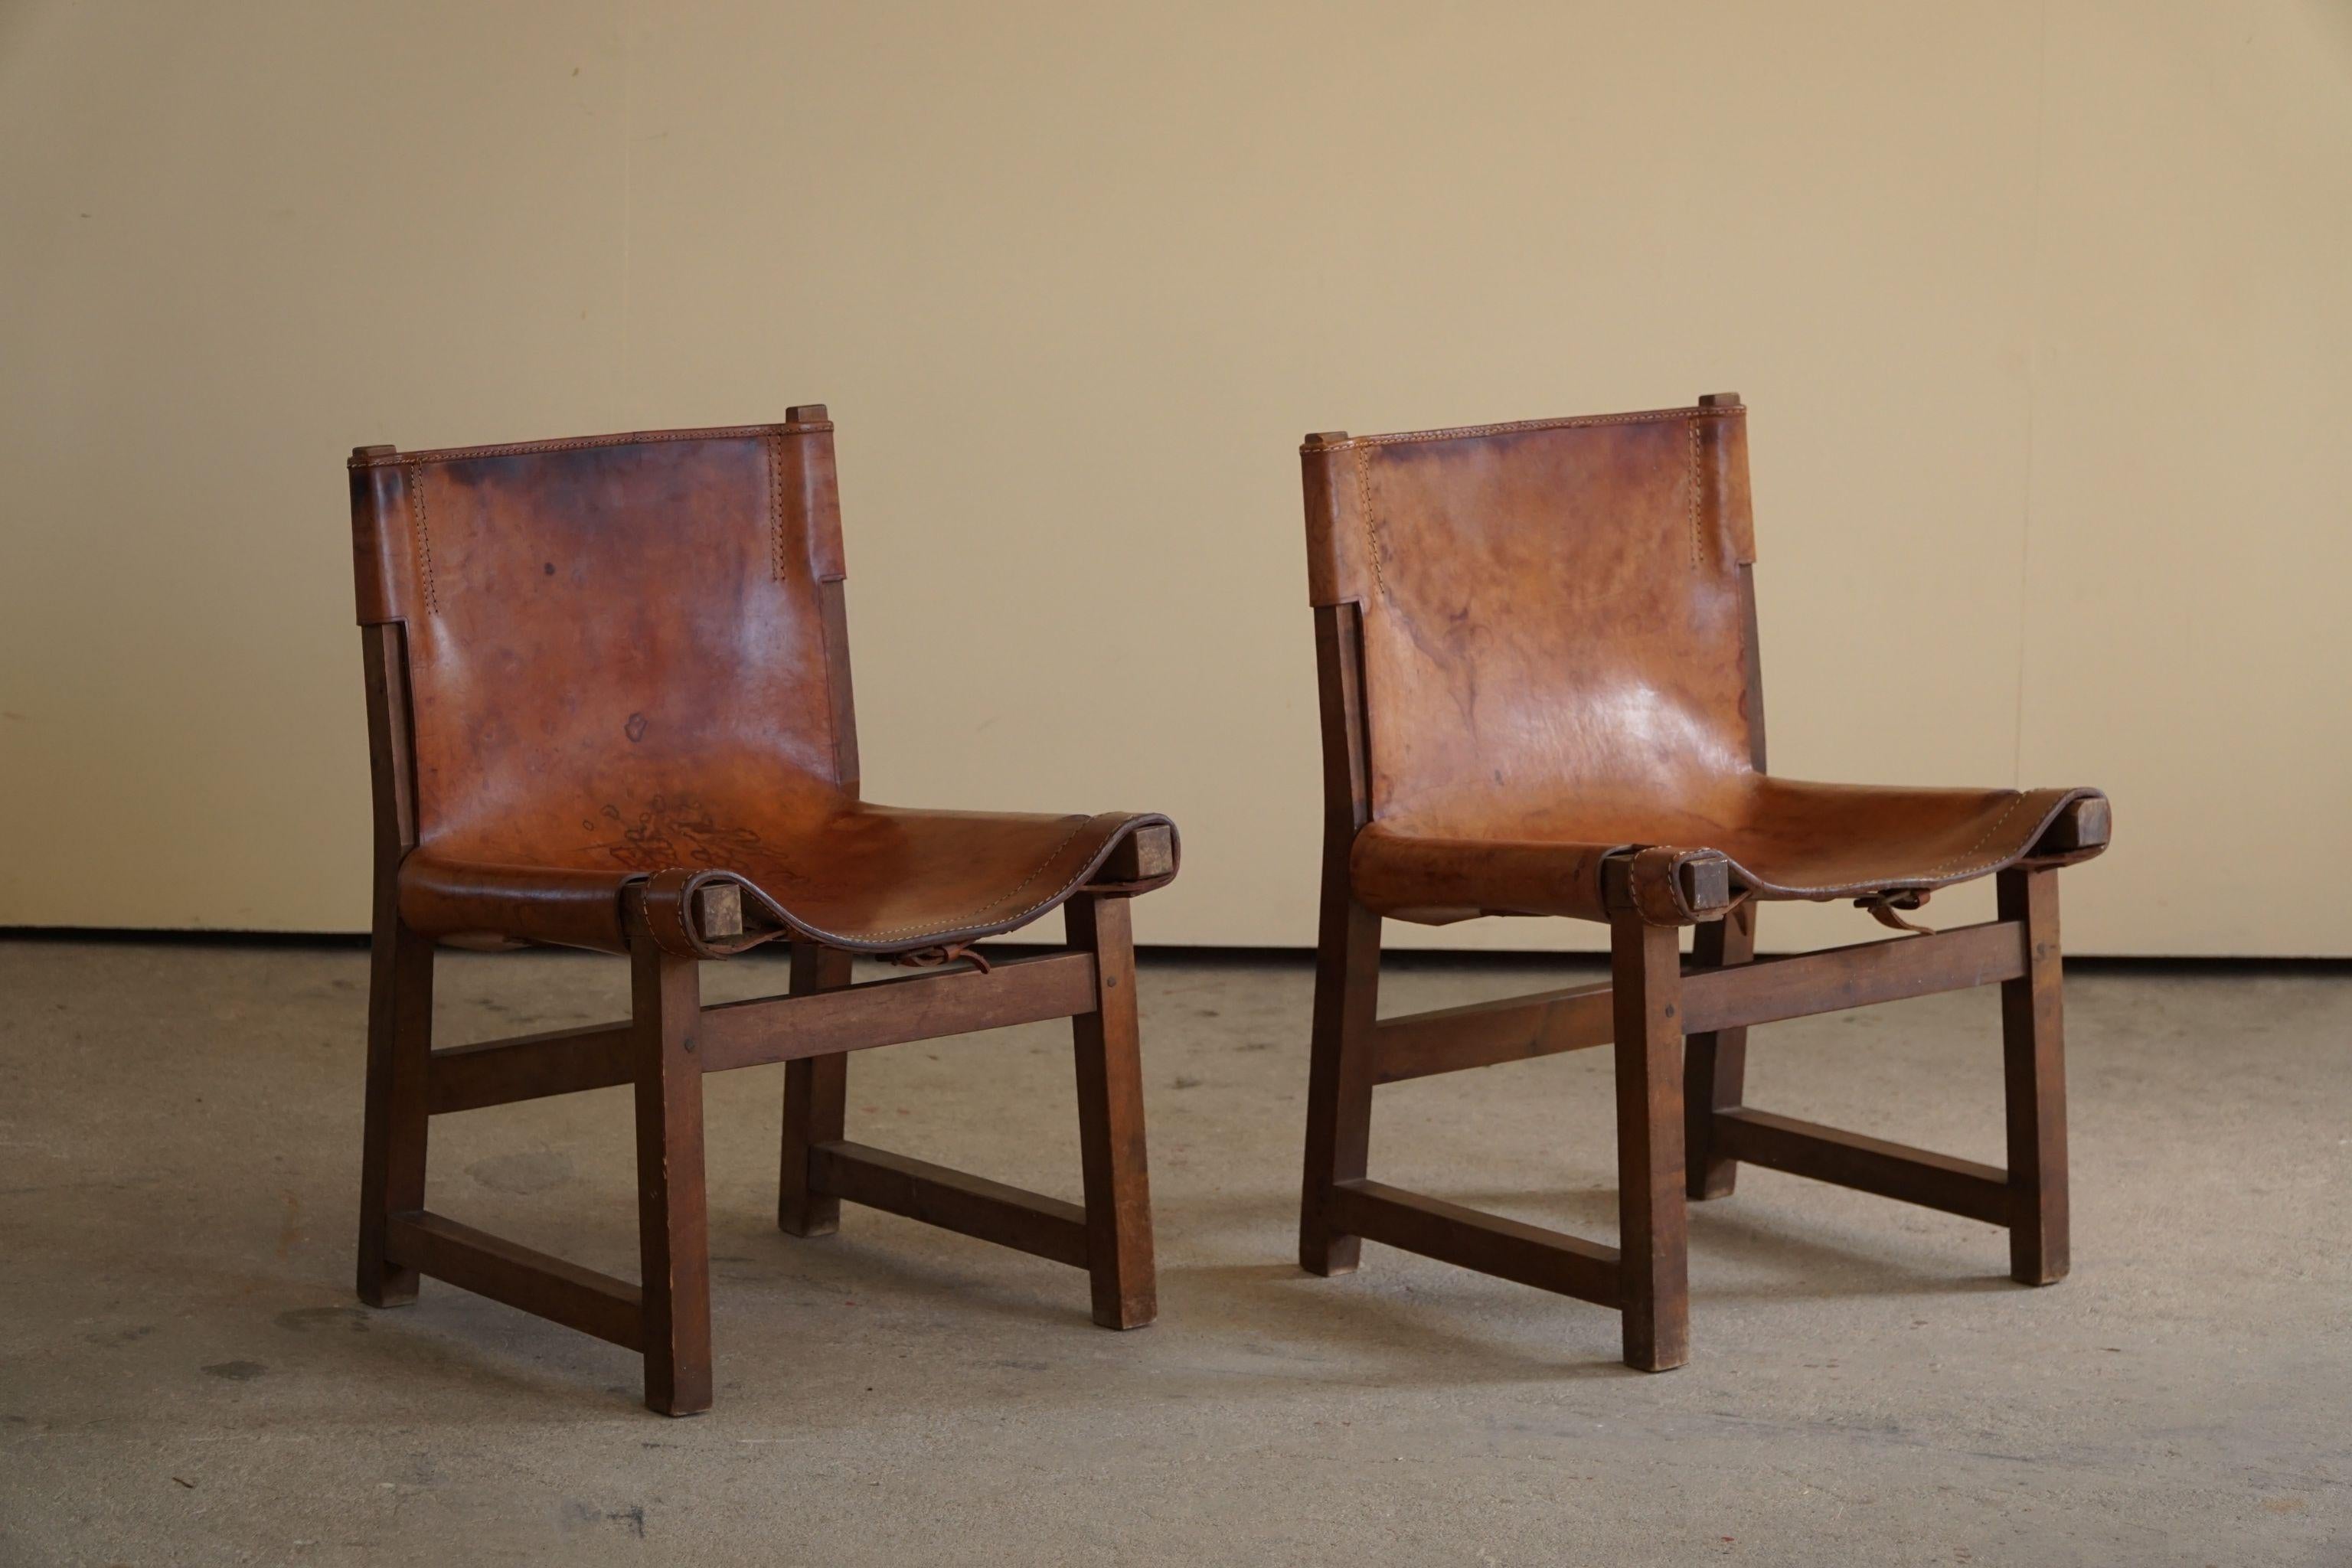 Paco Muñoz, Pair of Hunting Lounge Chairs, Model 